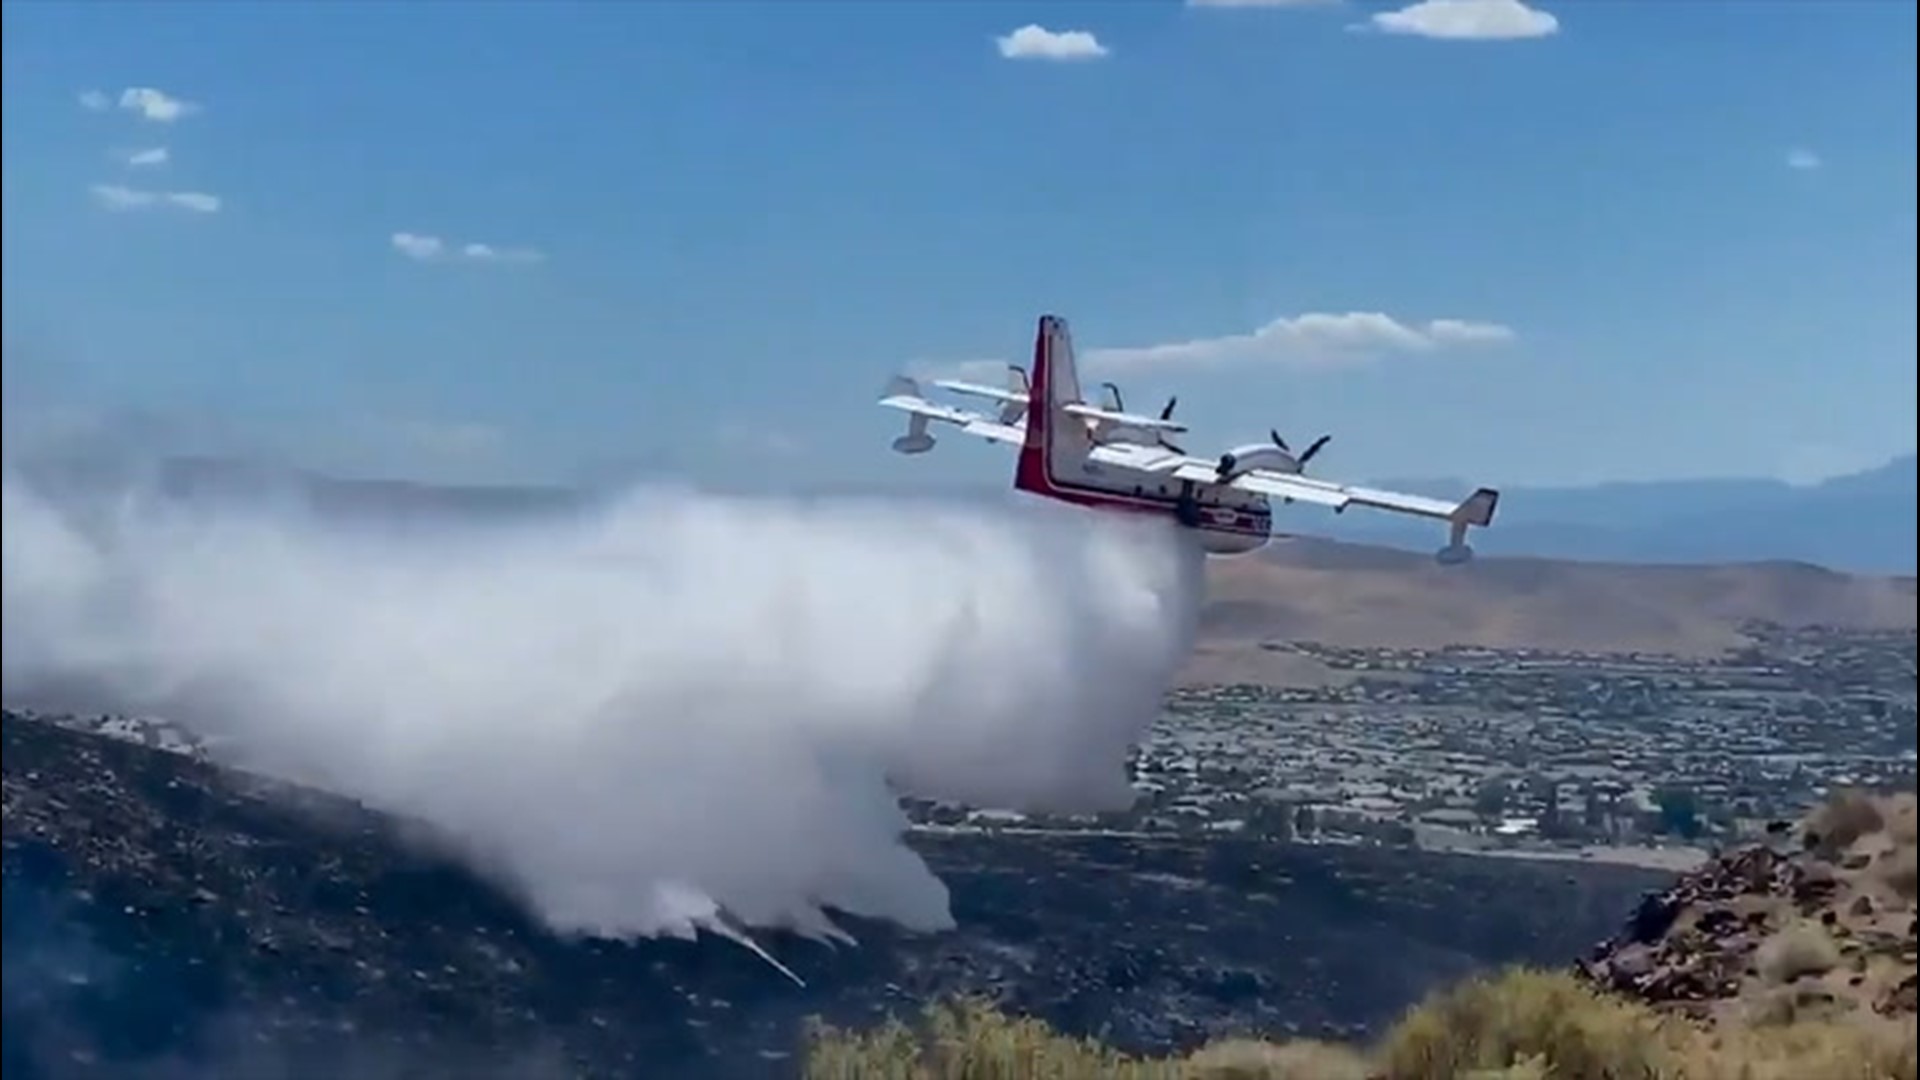 A water bomber dropped water on the Cielo Fire burning near Reno, Nevada, on July 2, as the fire forced some residents to evacuate.